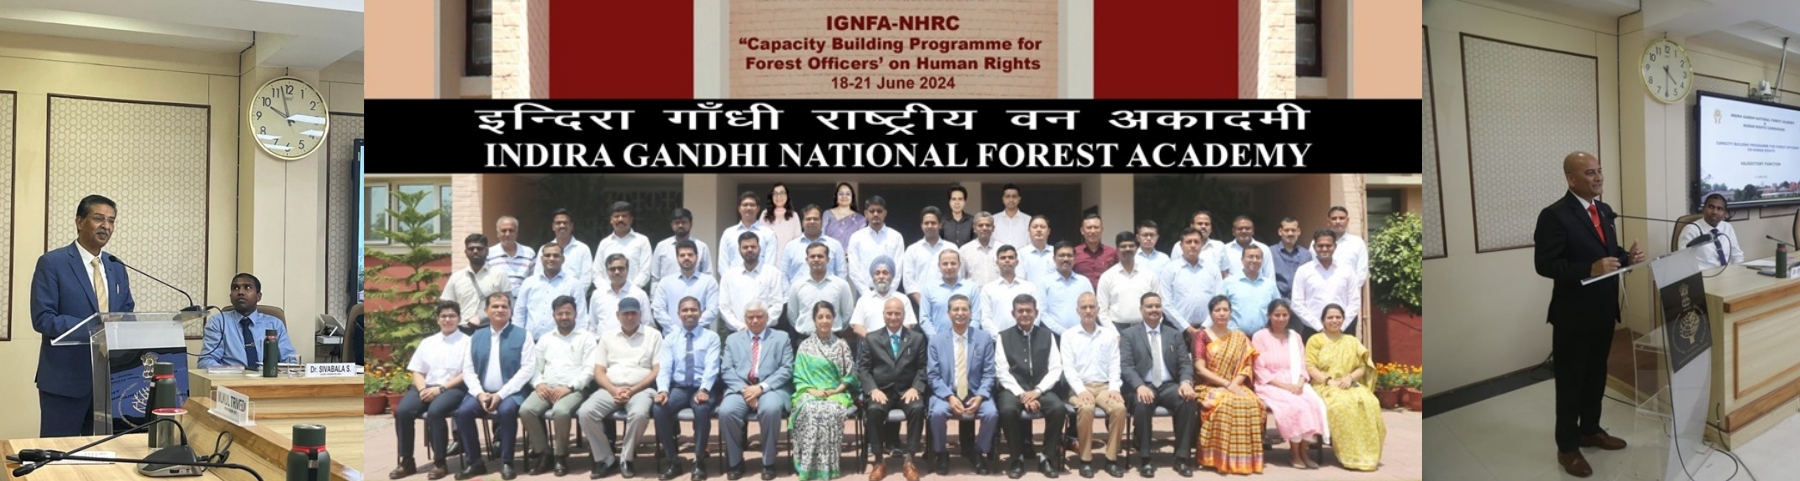 NHRC, India and IGNFA successfully conclude the first collaborative programme on human rights for forest officers in Dehradun (21.06.2024)